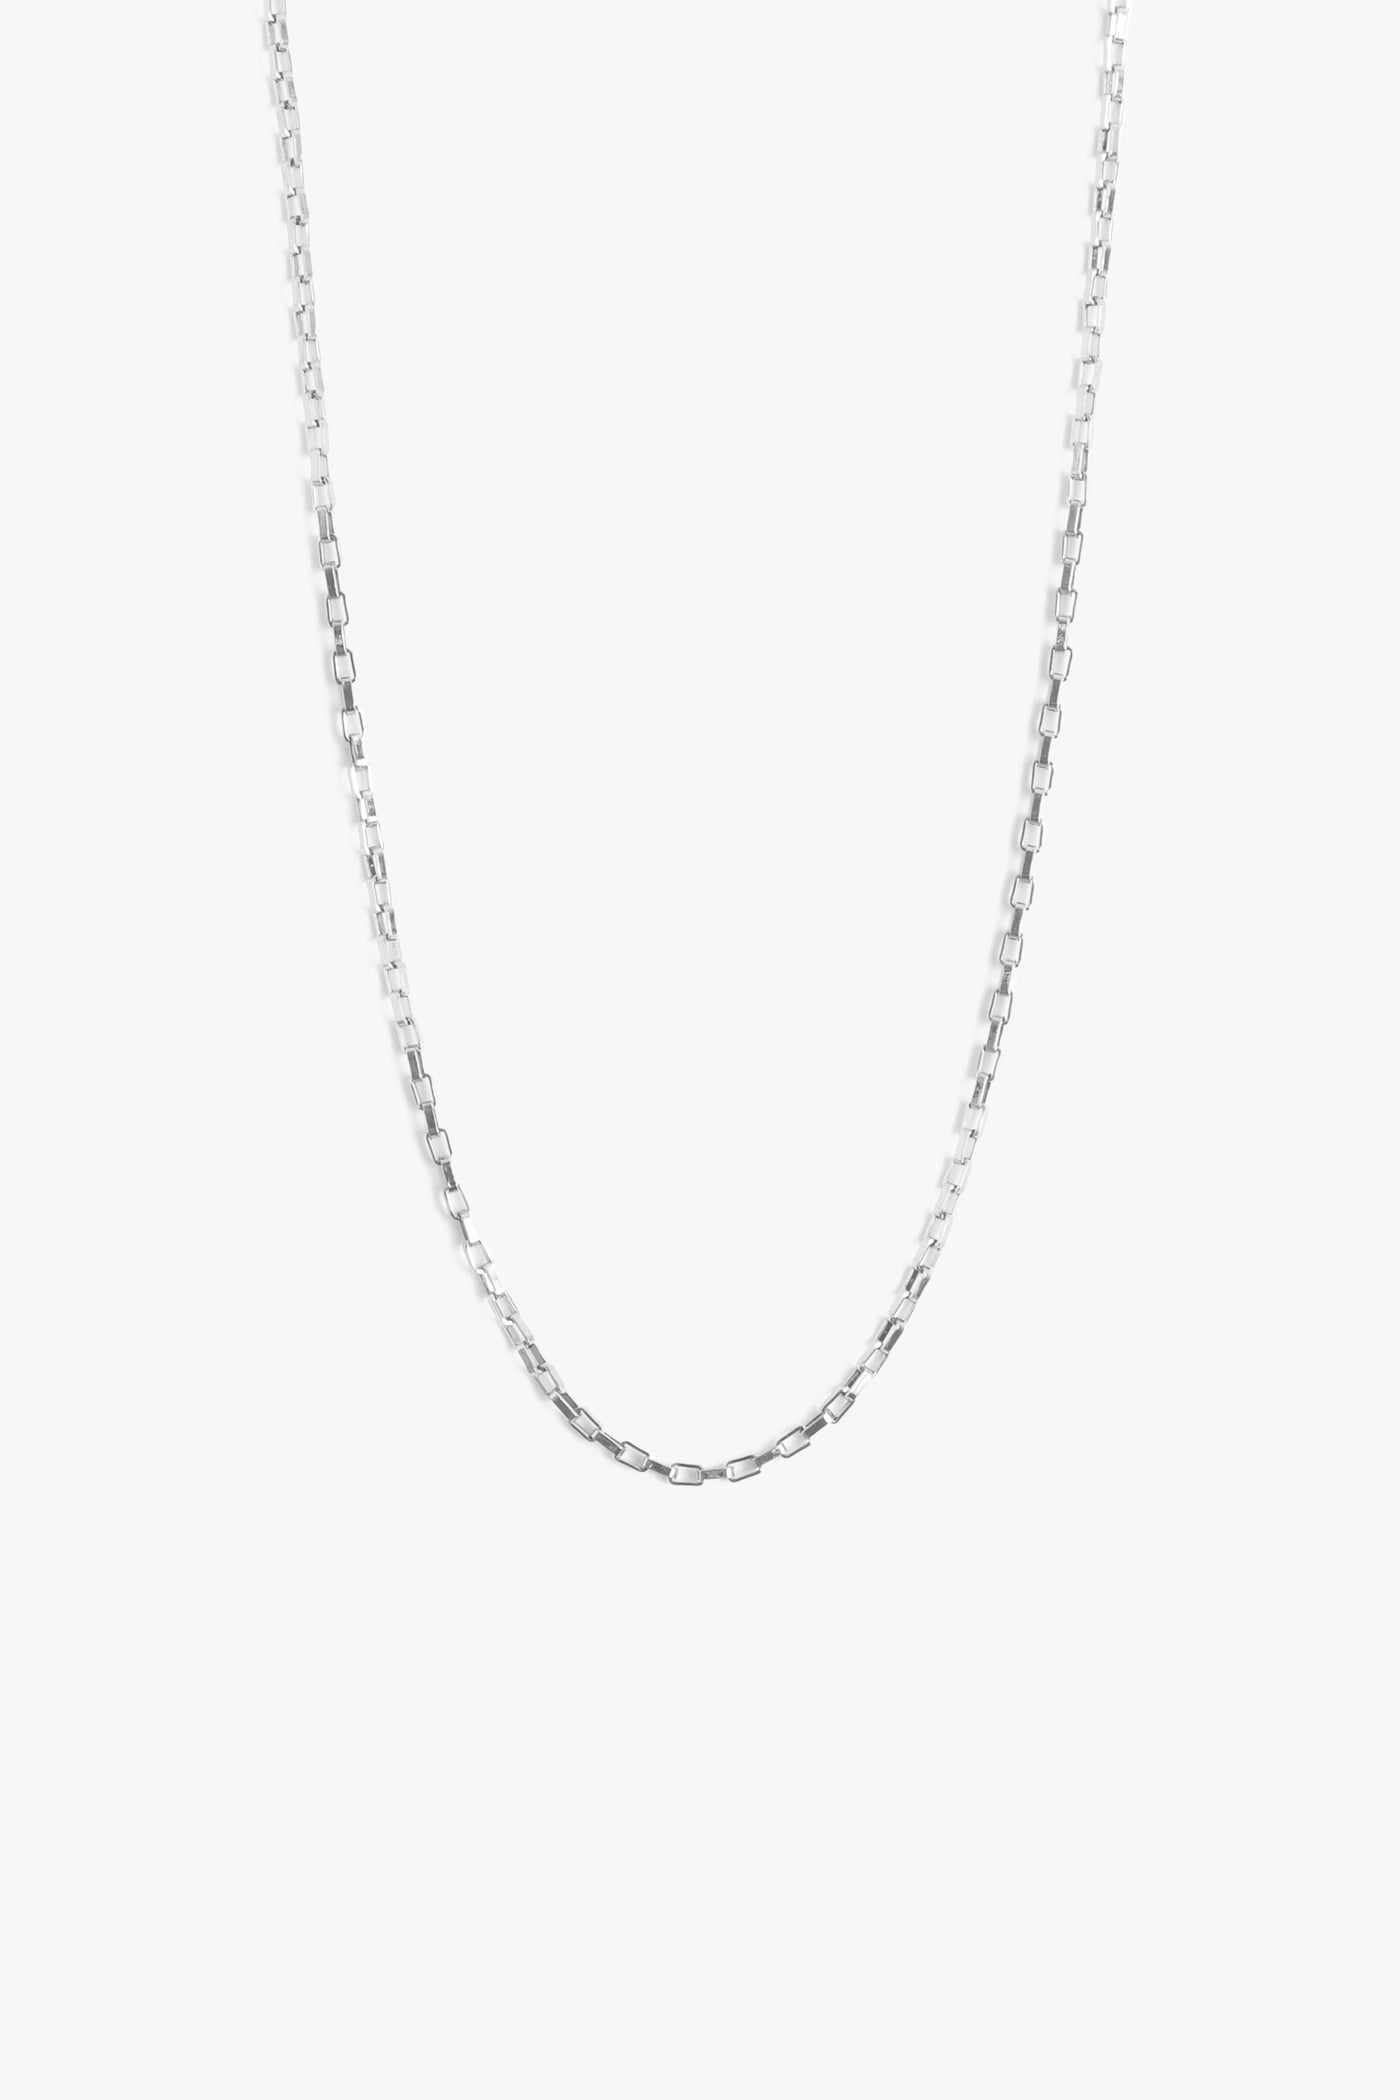 Marrin Costello Jewelry Mirage Chain delicate dainty rectangle link chain with lobster clasp closure and extender. Waterproof, sustainable, hypoallergenic. Polished stainless steel.